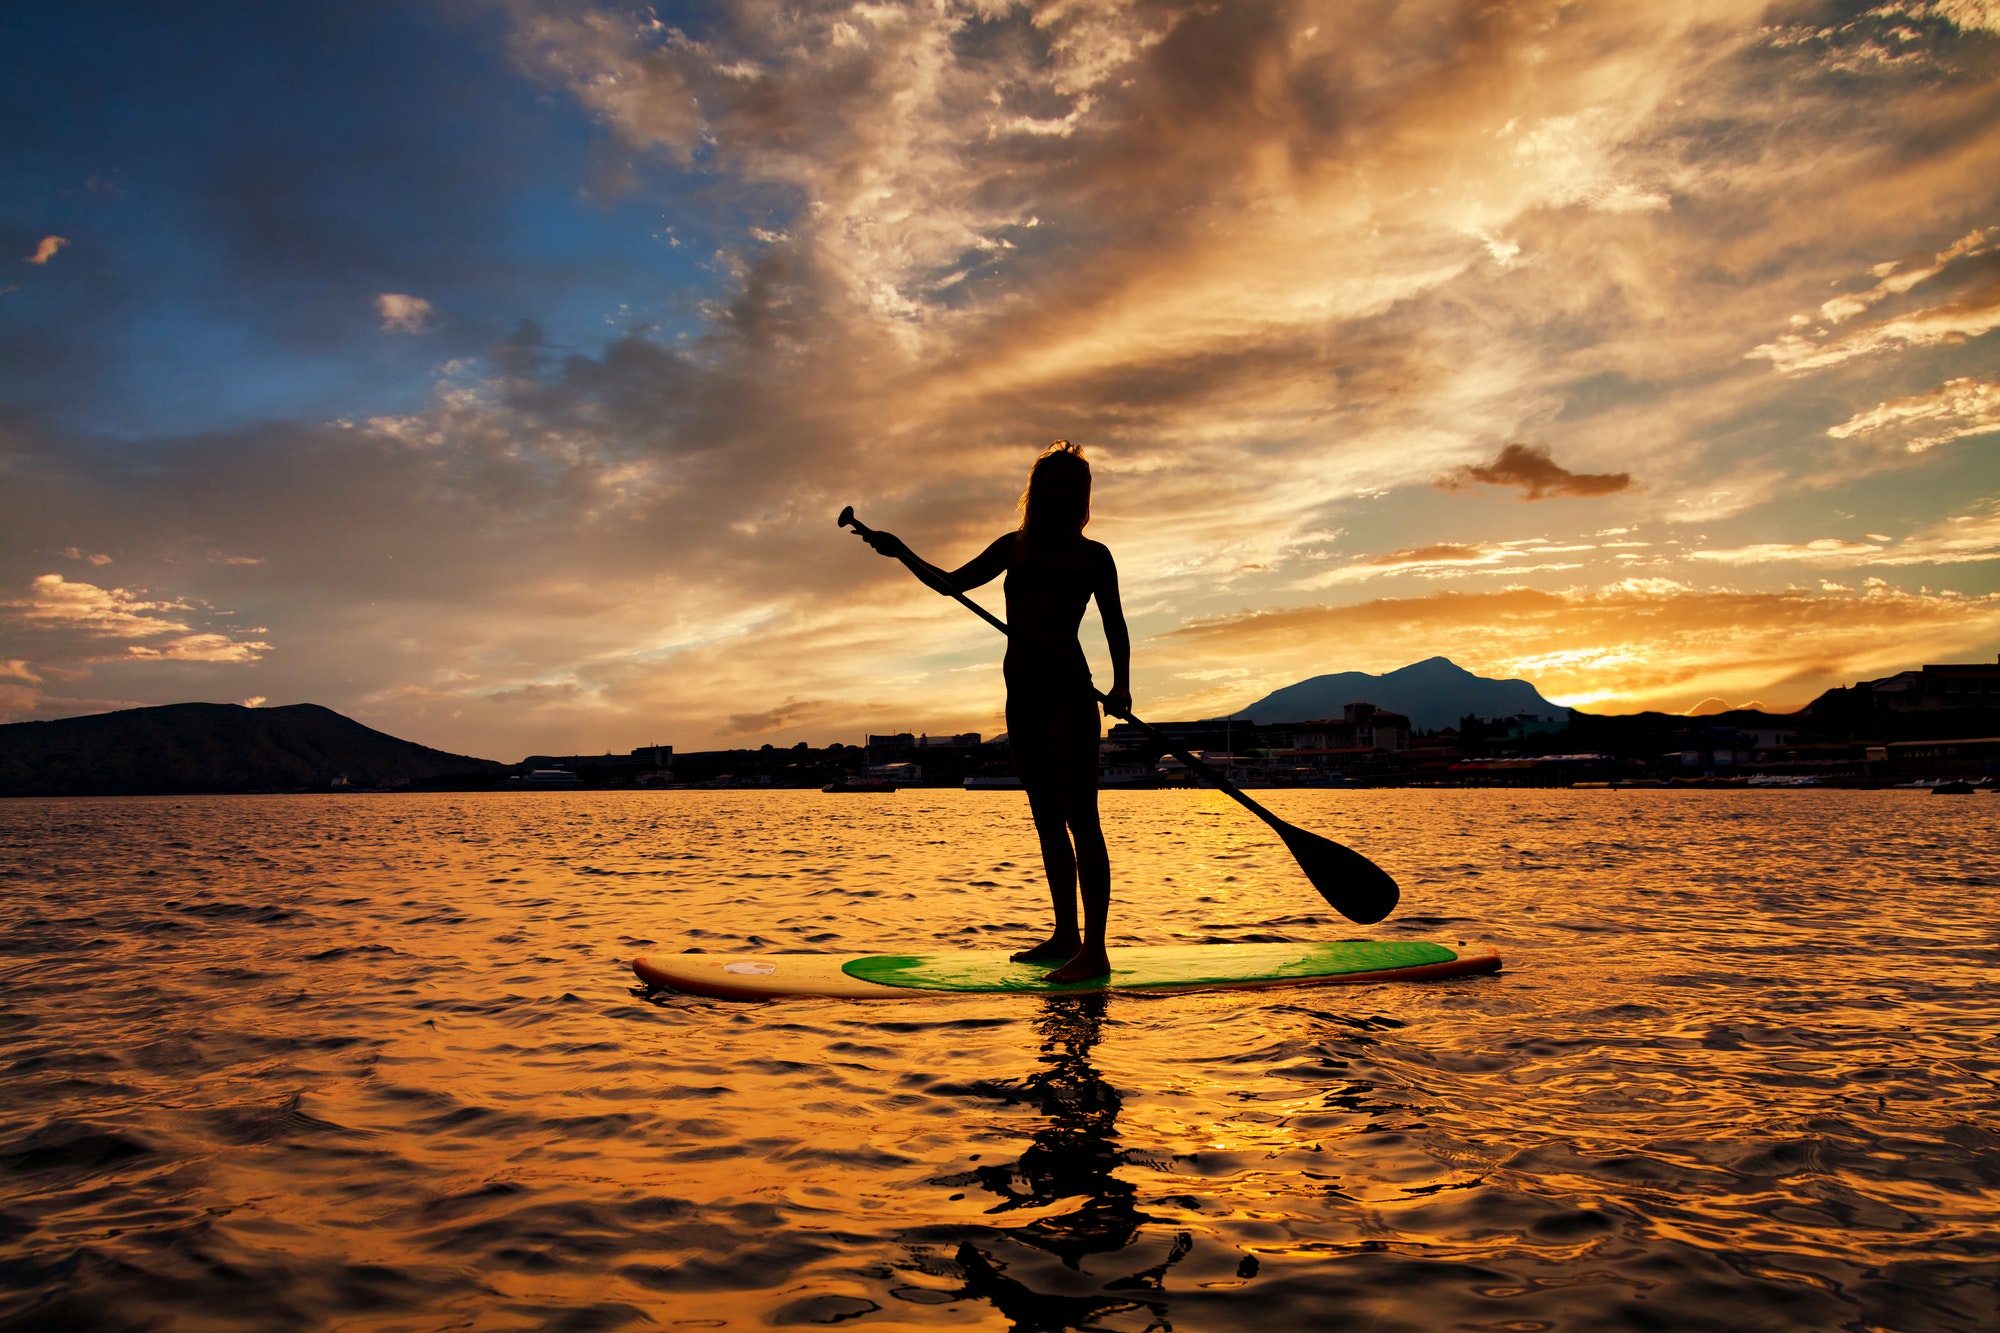 The Best Destinations for Stand-Up Paddleboarding